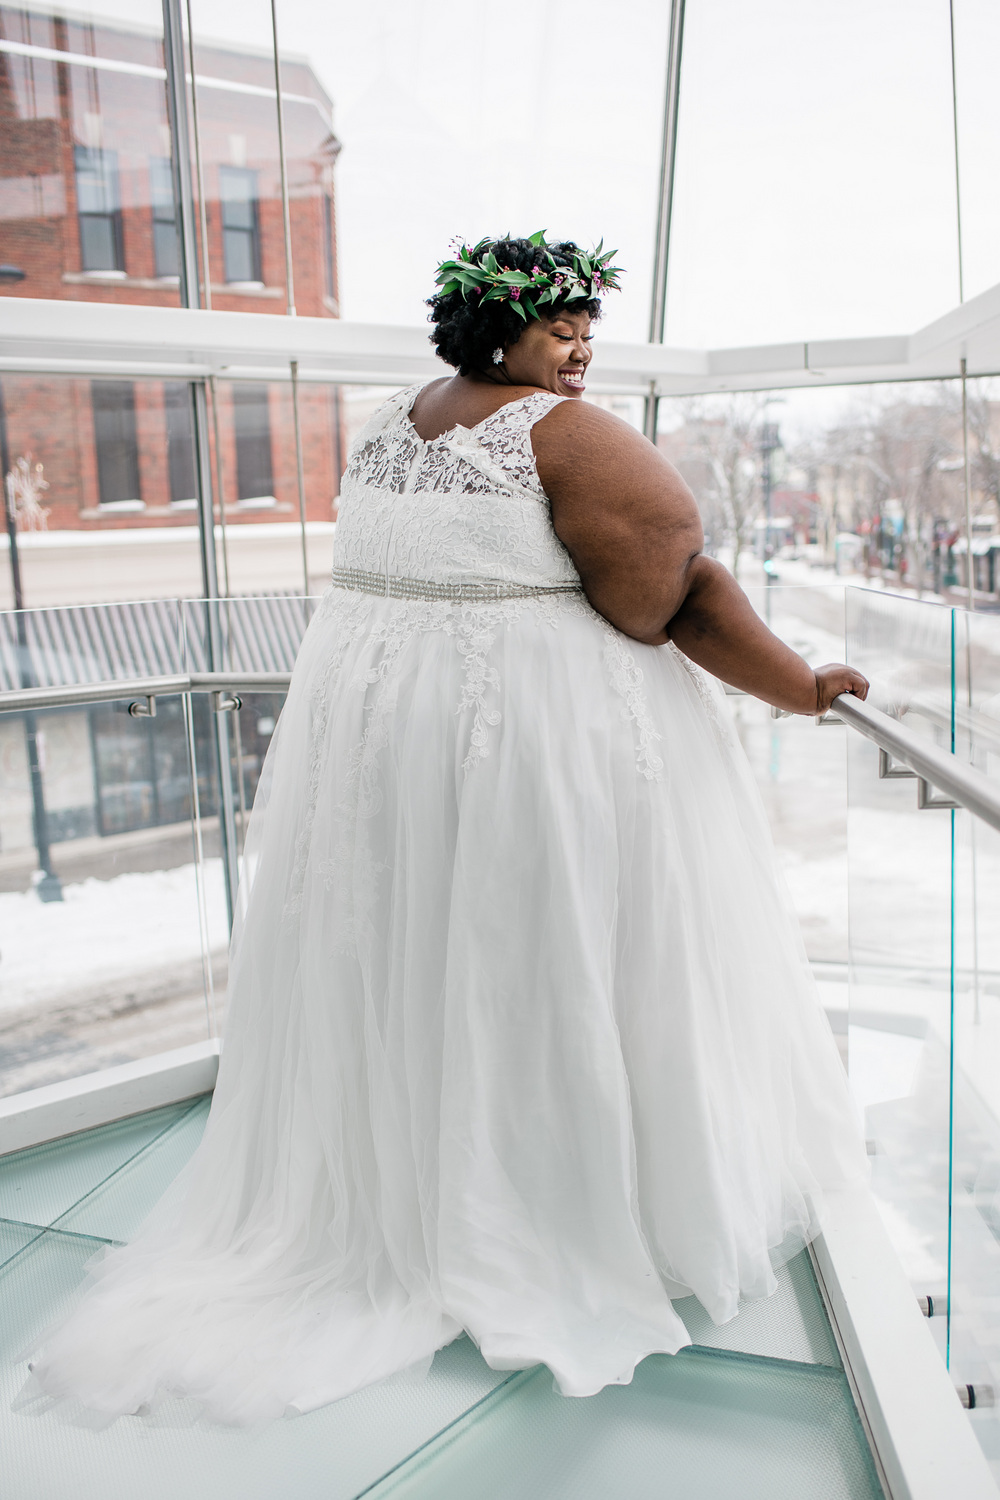 Mechanic Shop Femme and FlyNFluffy drop a size 3X+ Plus Size Bridal Look Book! 